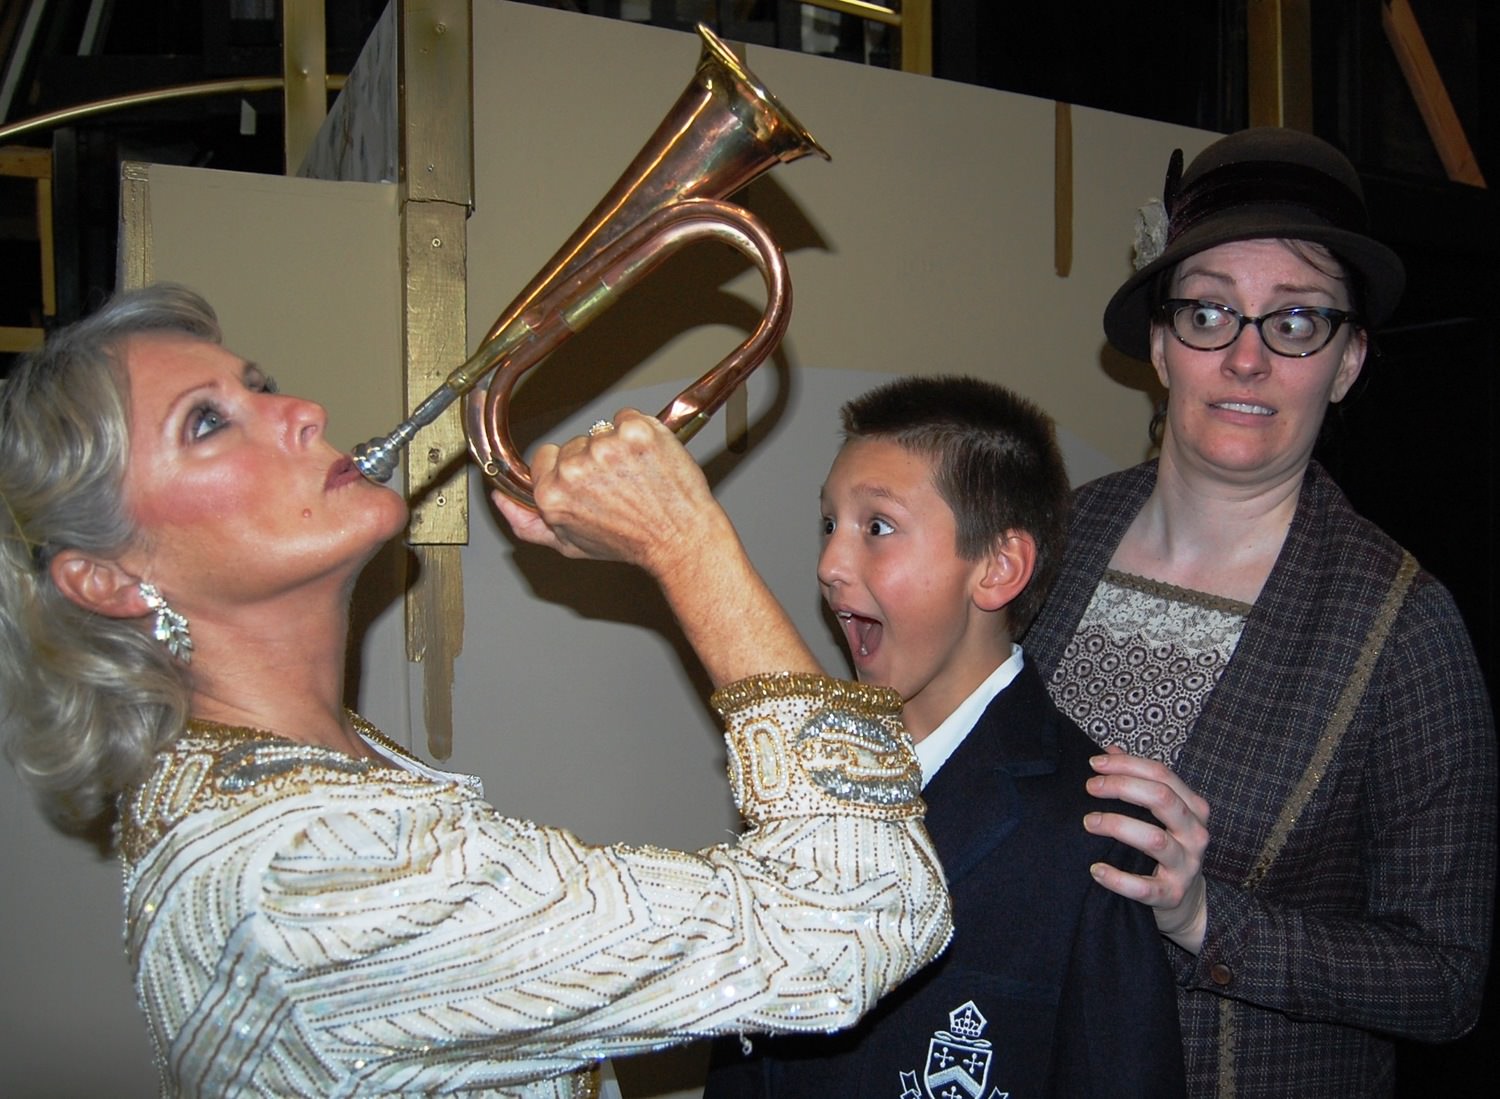 Mame Dennis (Patty Ward) blows her bugle to declare” It’s Today” as Young Patrick Dennis (Jonas Annear) and Agnes Gooch (Kathleen Duffy) look on.